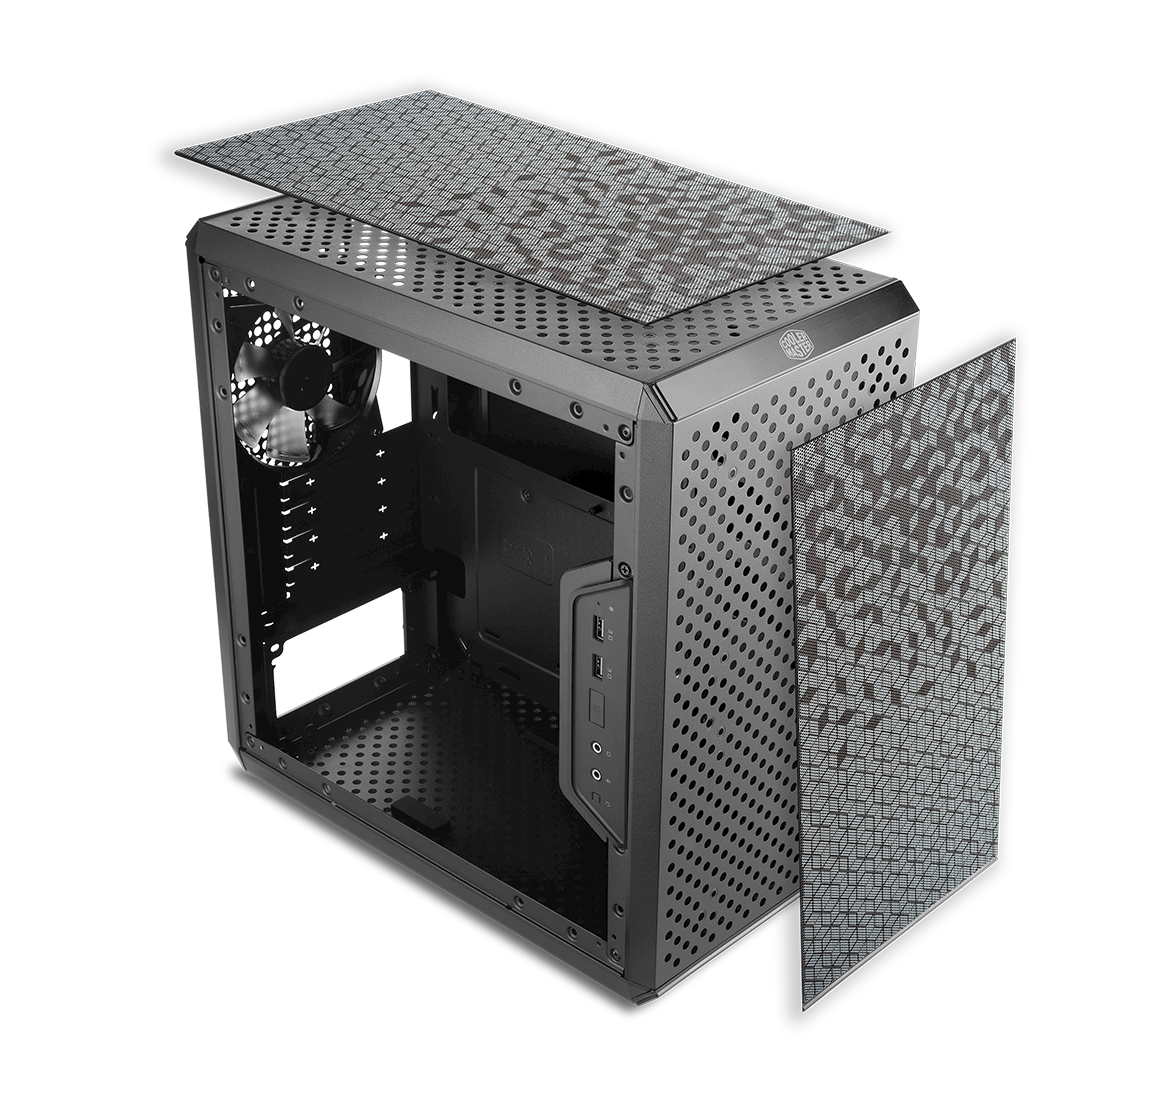 Cooler Master MasterBox Q300L Mini Tower PC Case Patterned Magnetic Dustfilters